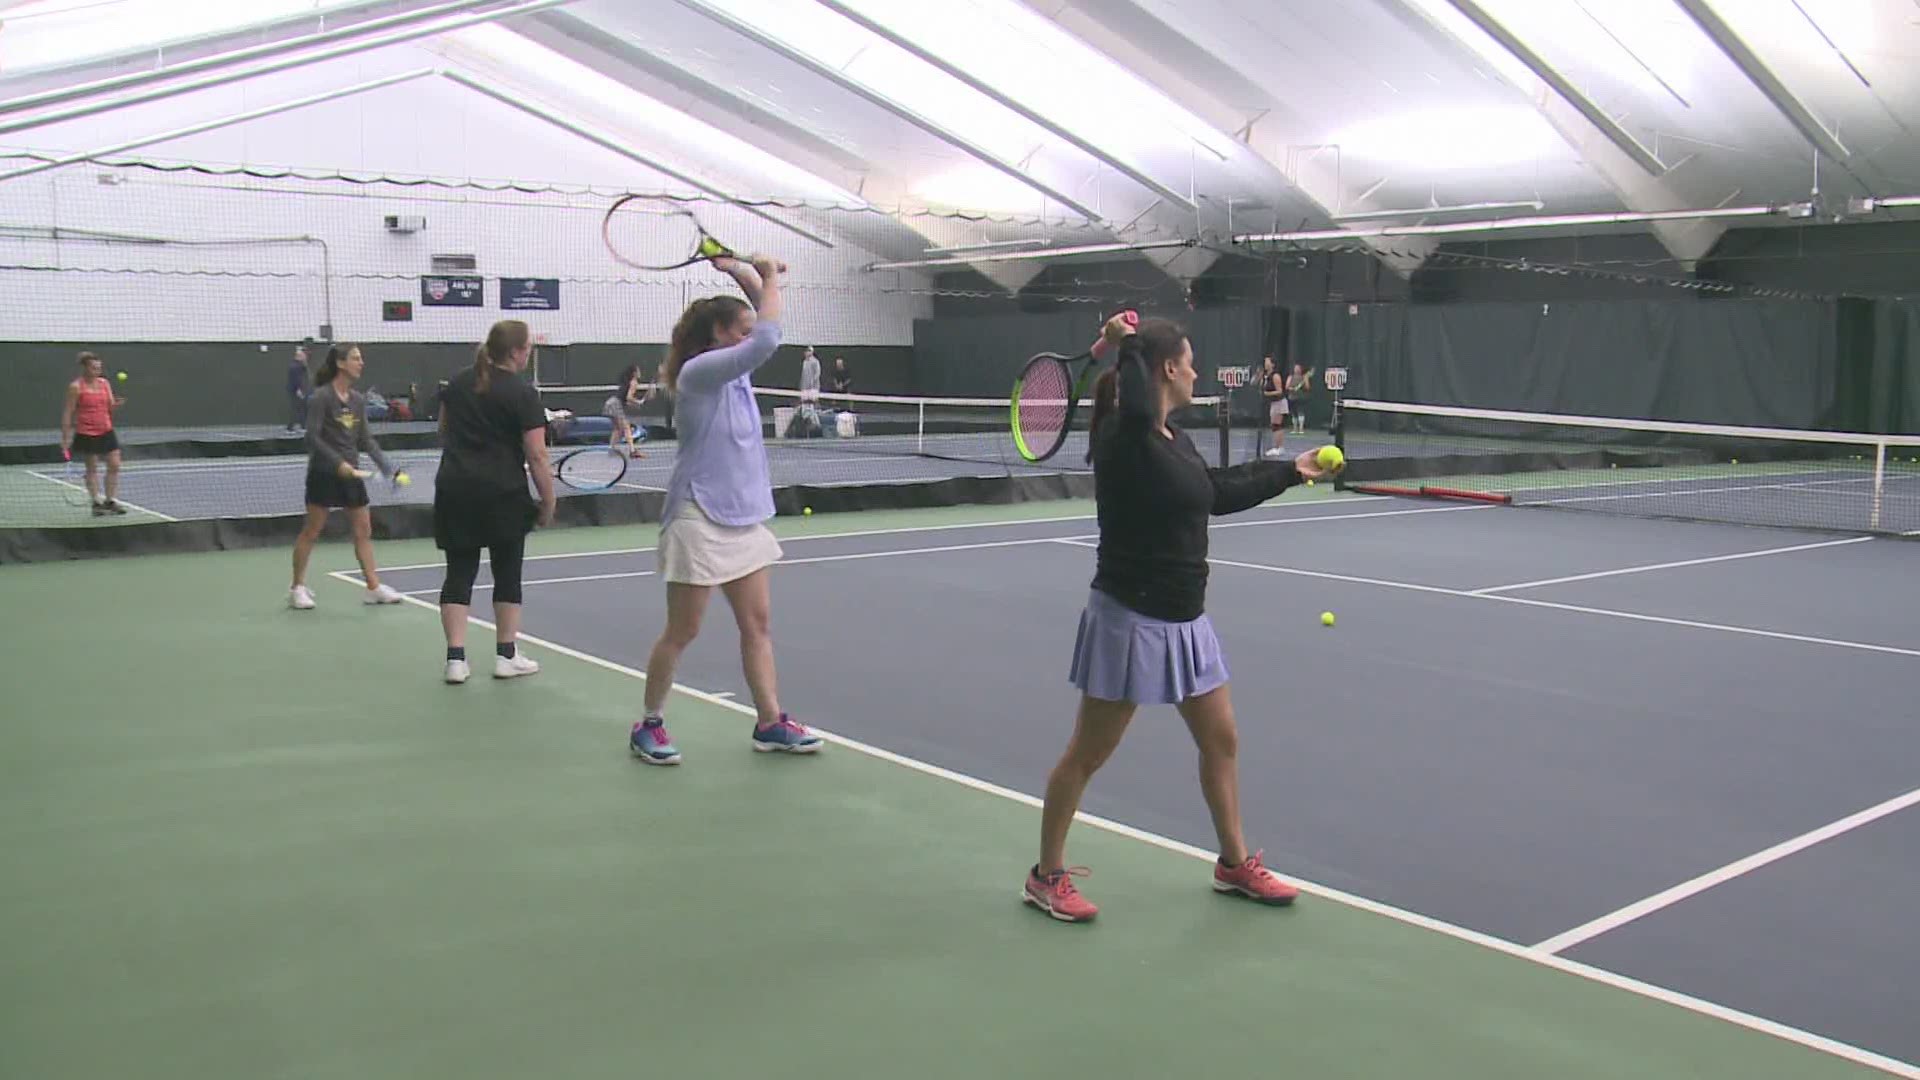 Play tennis even when it's snowing outside!